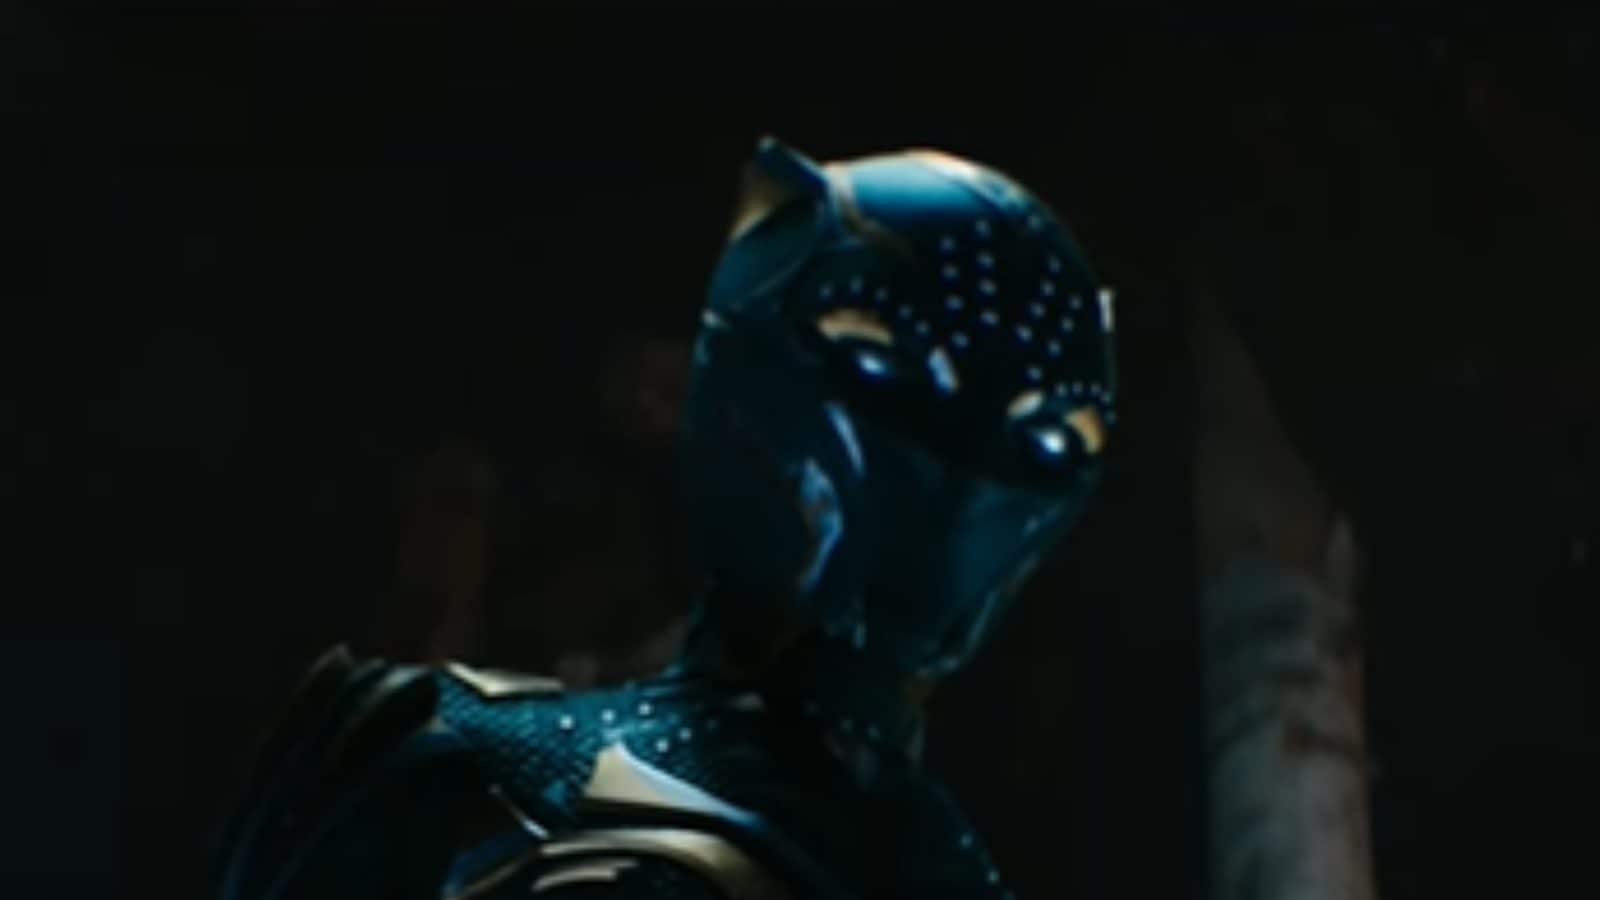 Black Panther 2 Trailer: Shuri Dons Iconic Suit, Namor Stands Out; MCU